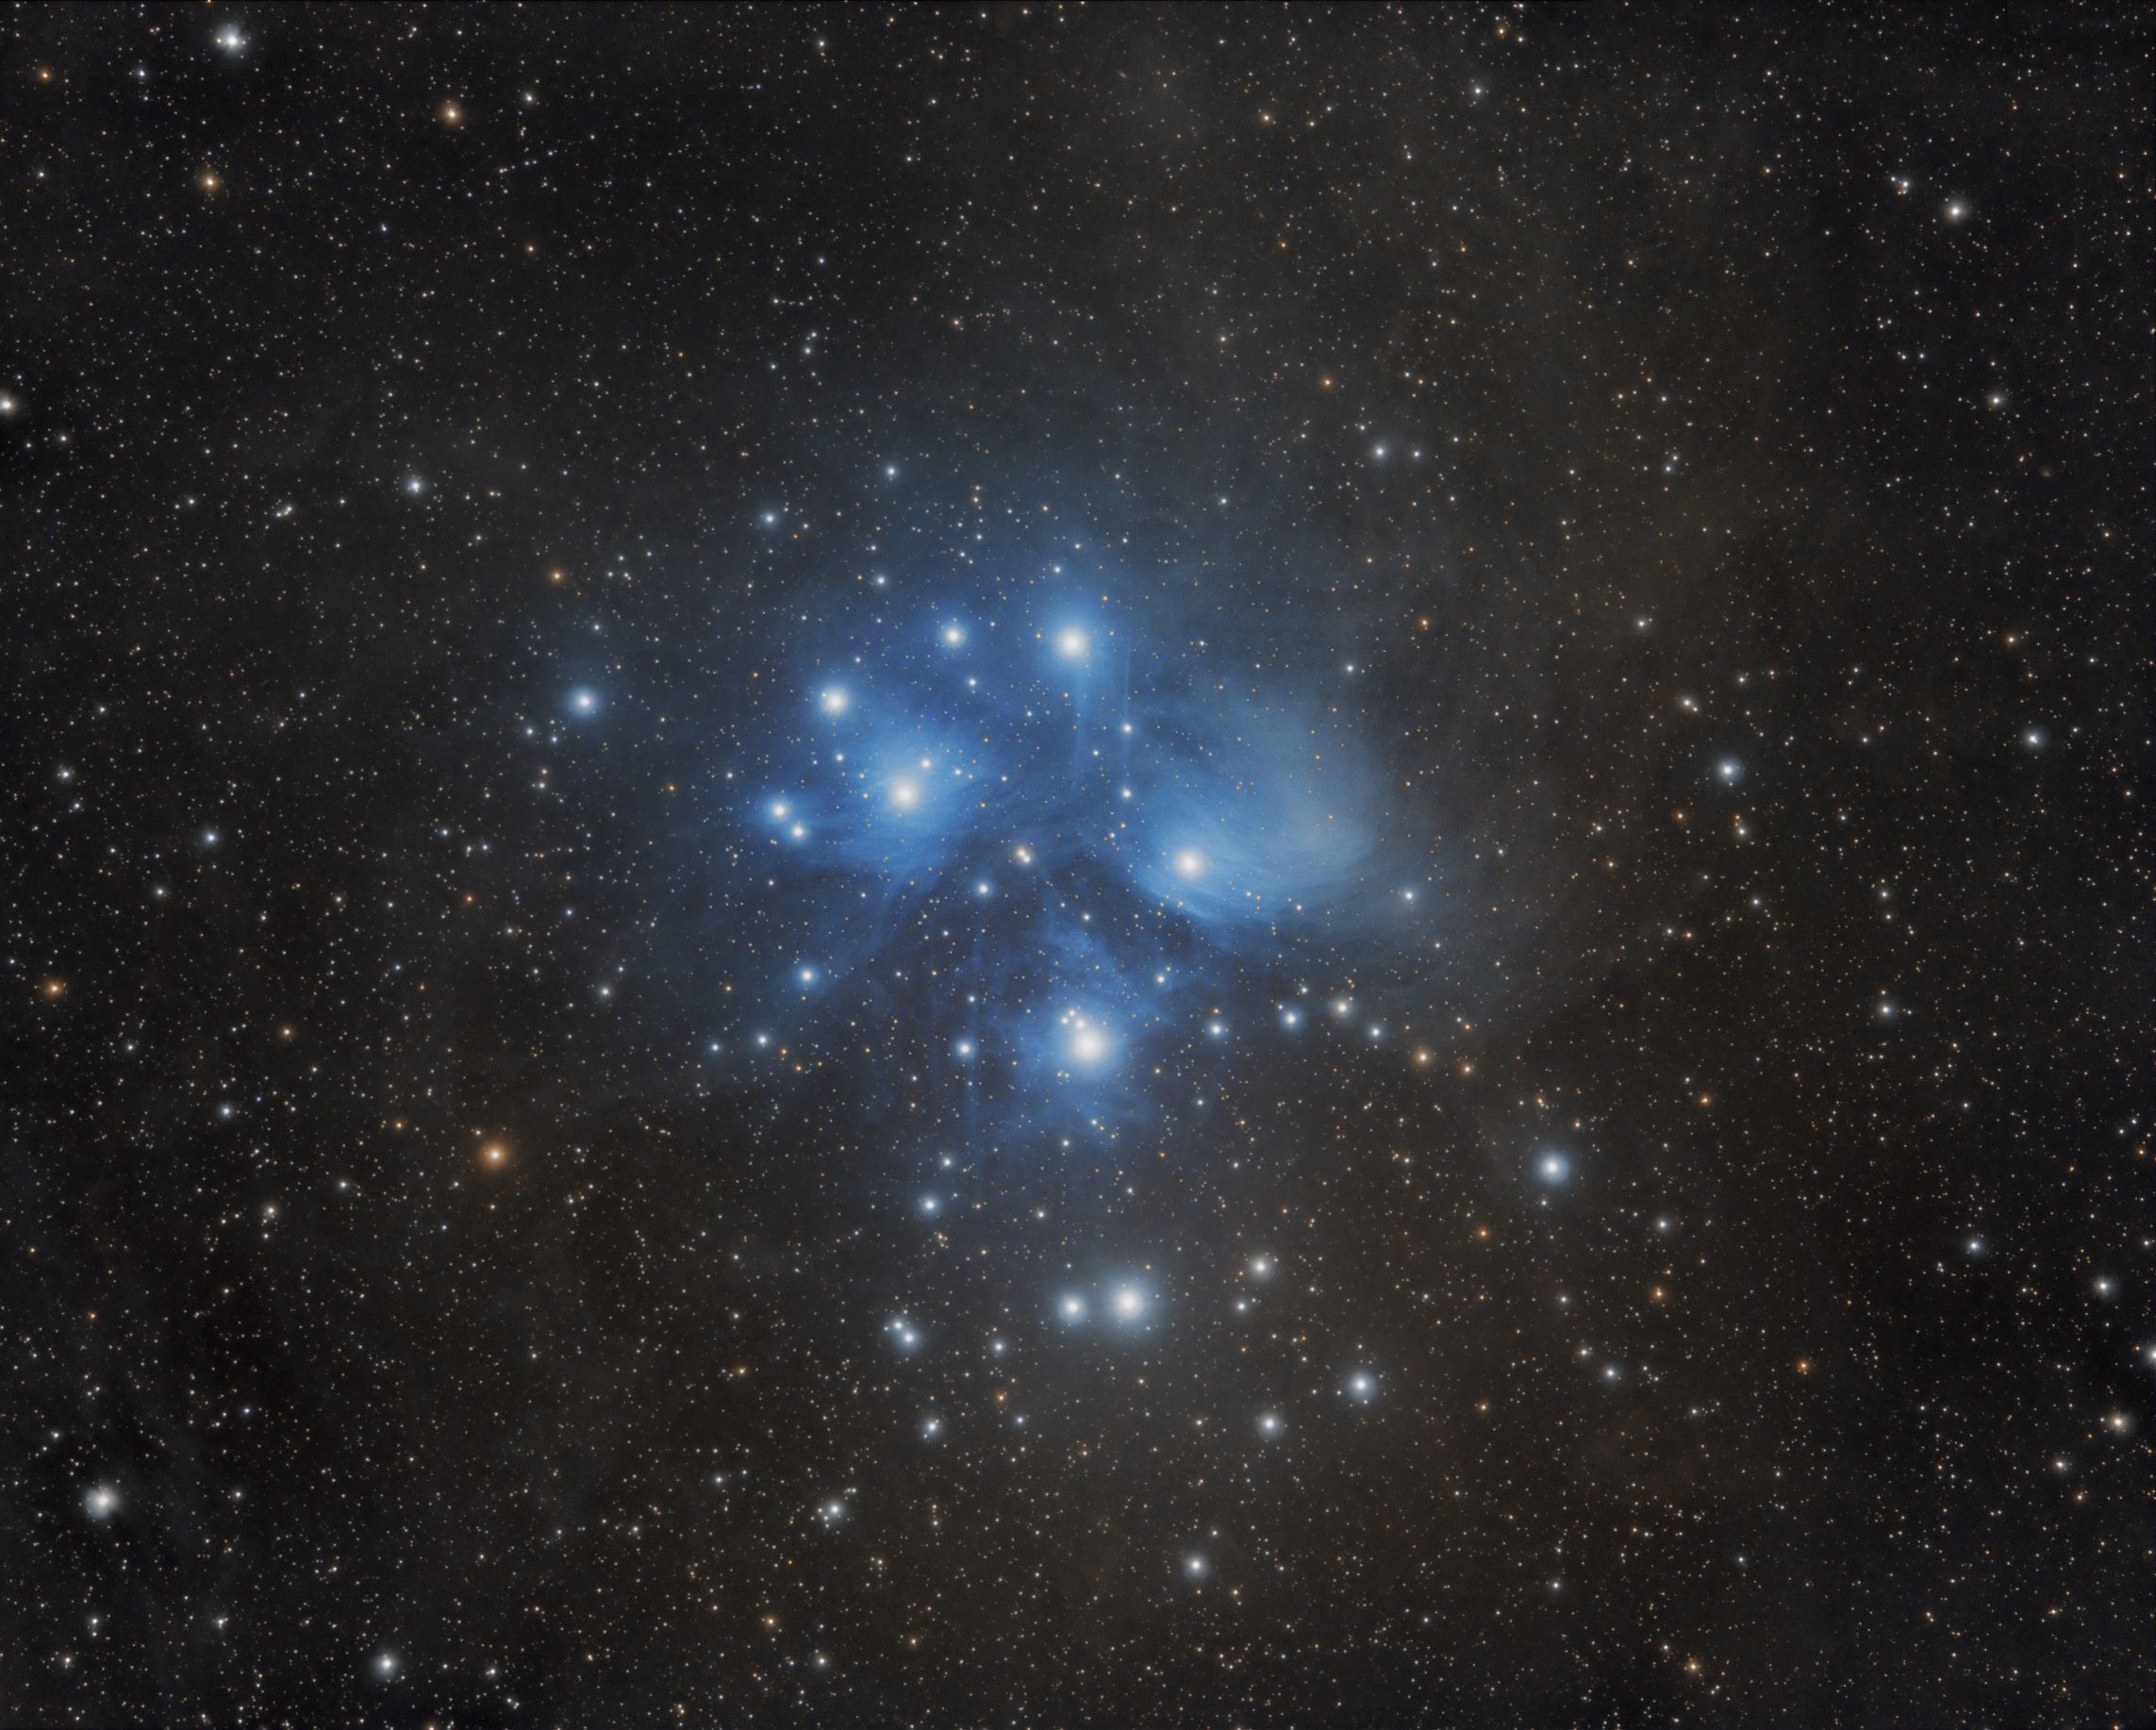 Astronomical image of a cluster of vivid blue stars against a black sky. There are about a dozen bright stars near the centre. The background contains innumerable faint stars of various colours.